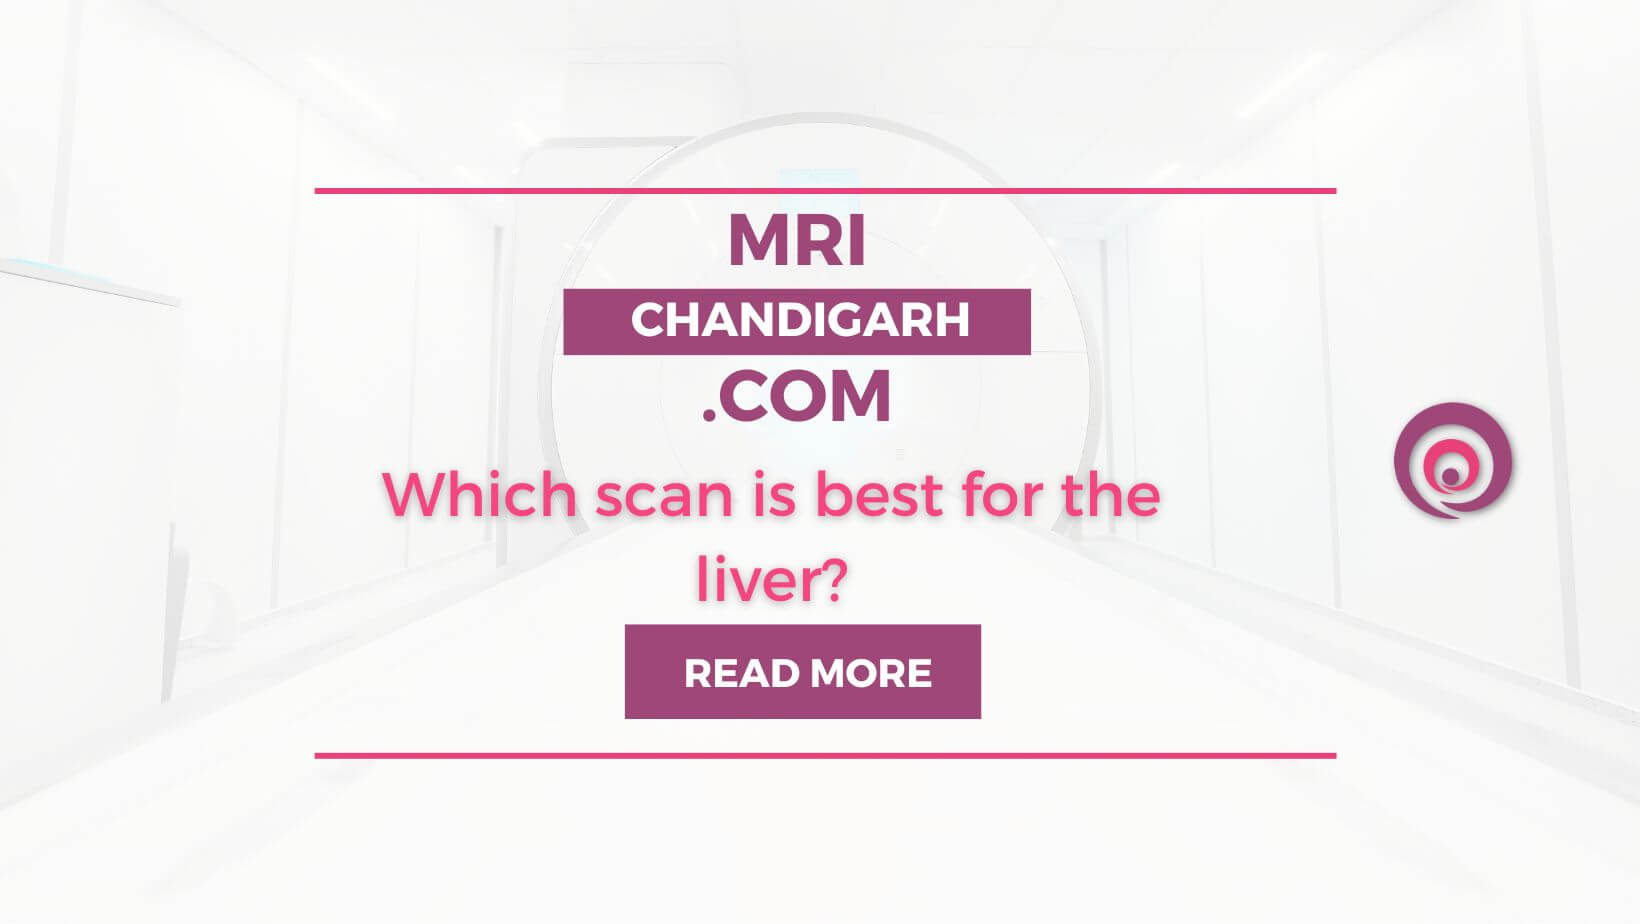 Which scan is best for the liver?